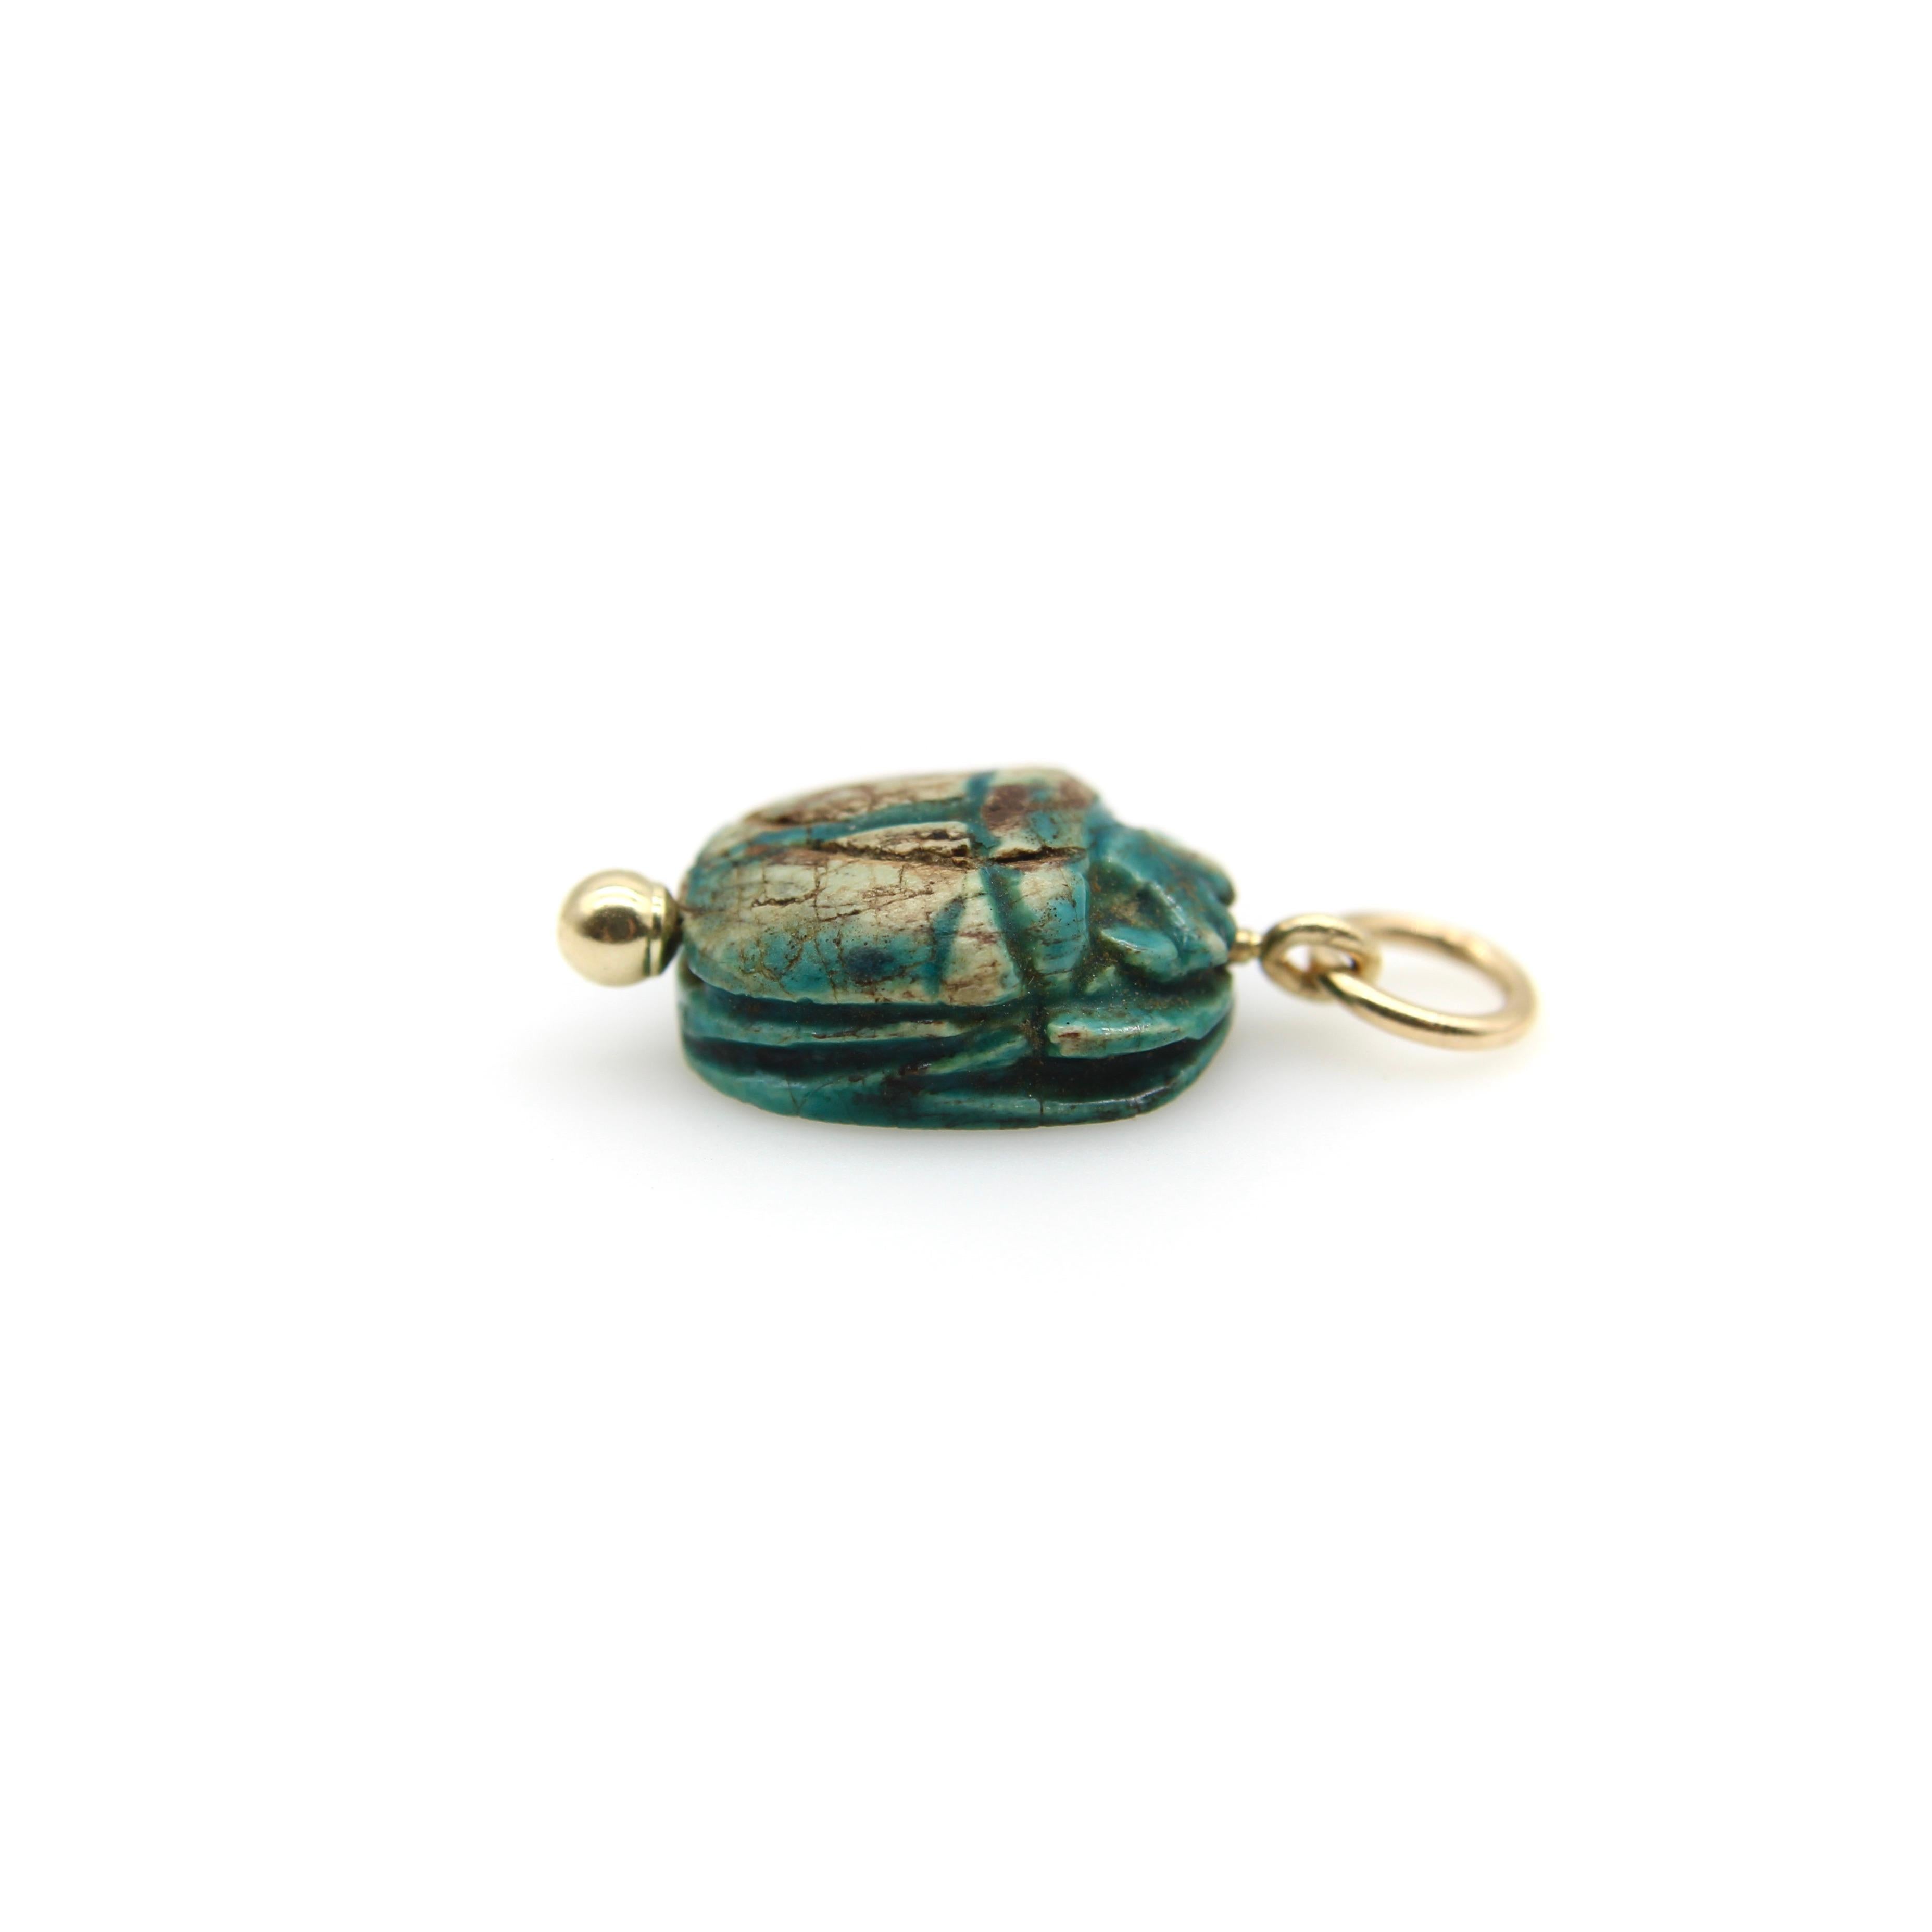 Egyptian Revival Faience Turquoise and Brown Scarab Pendant with 14K Gold Mount  In Good Condition For Sale In Venice, CA